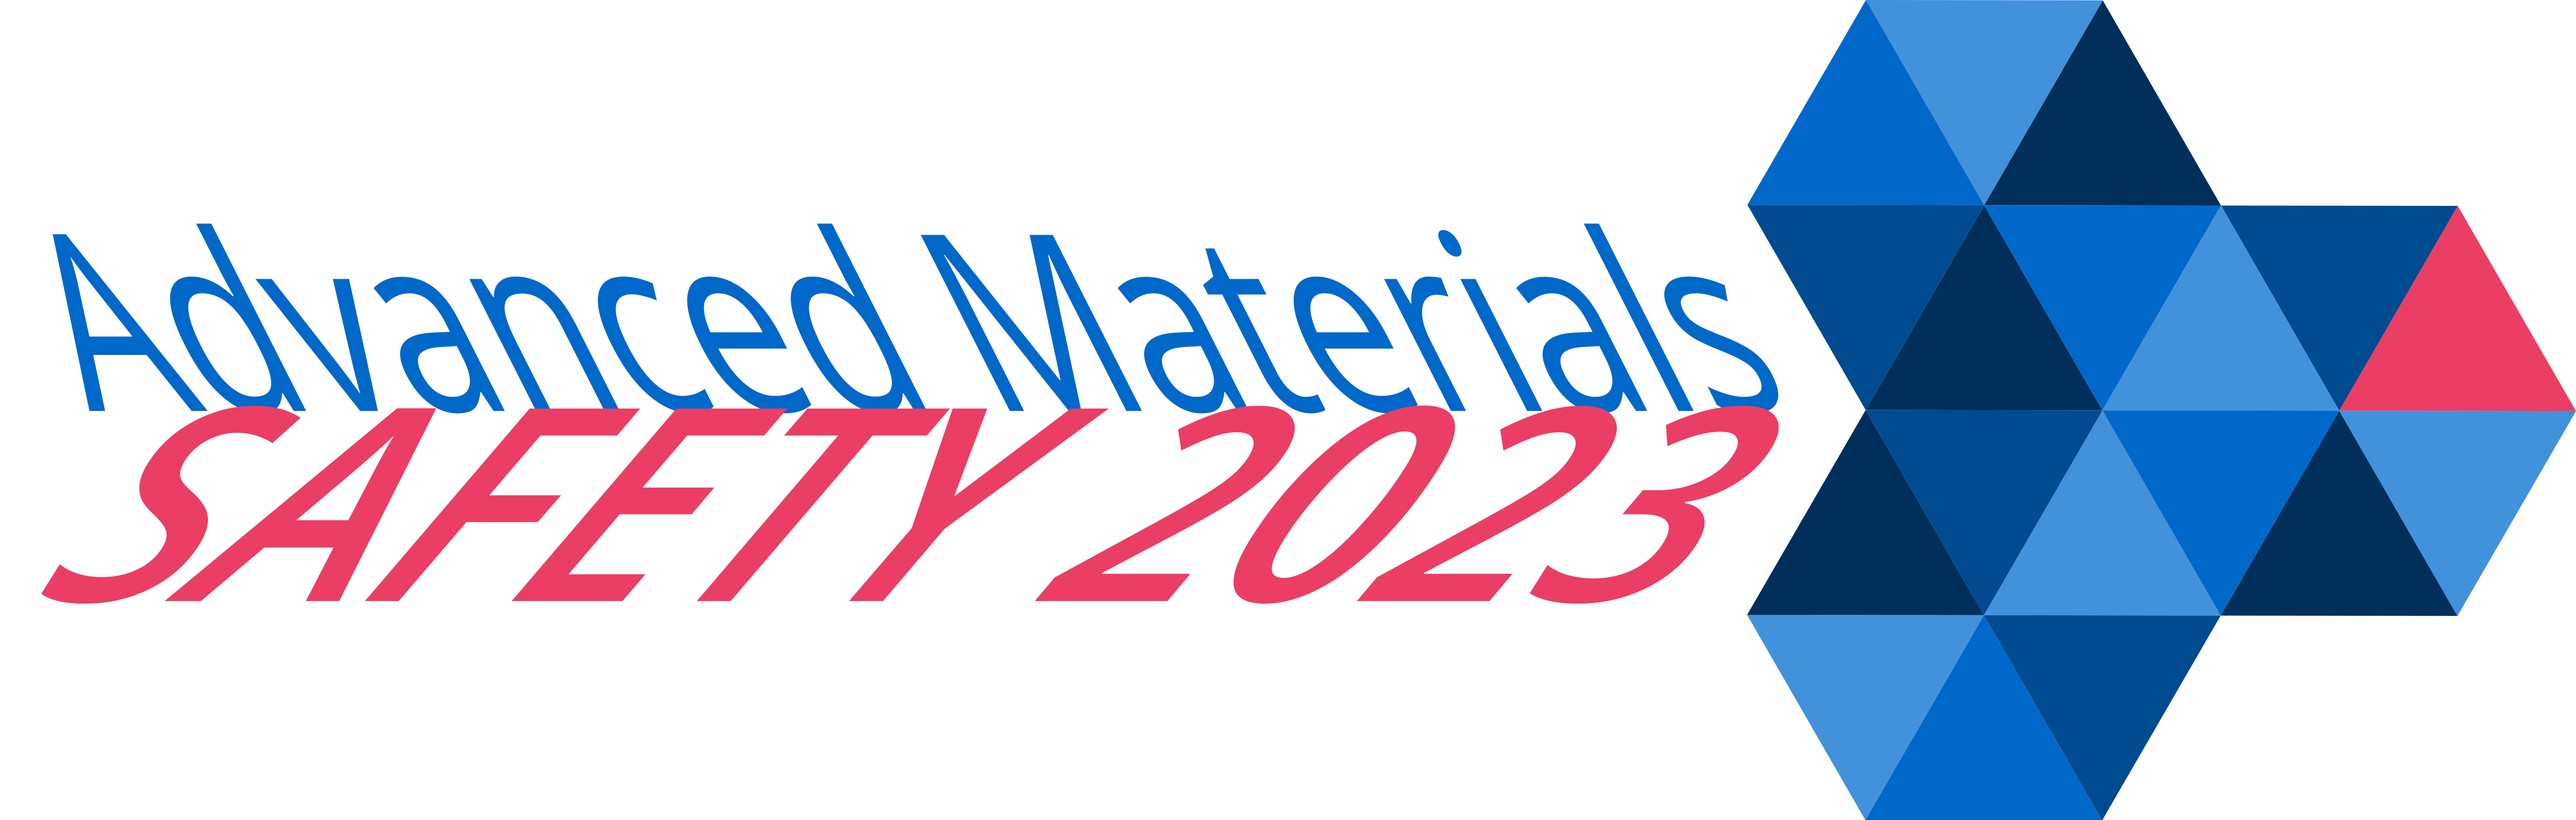 Advanced Materials Safety 2023